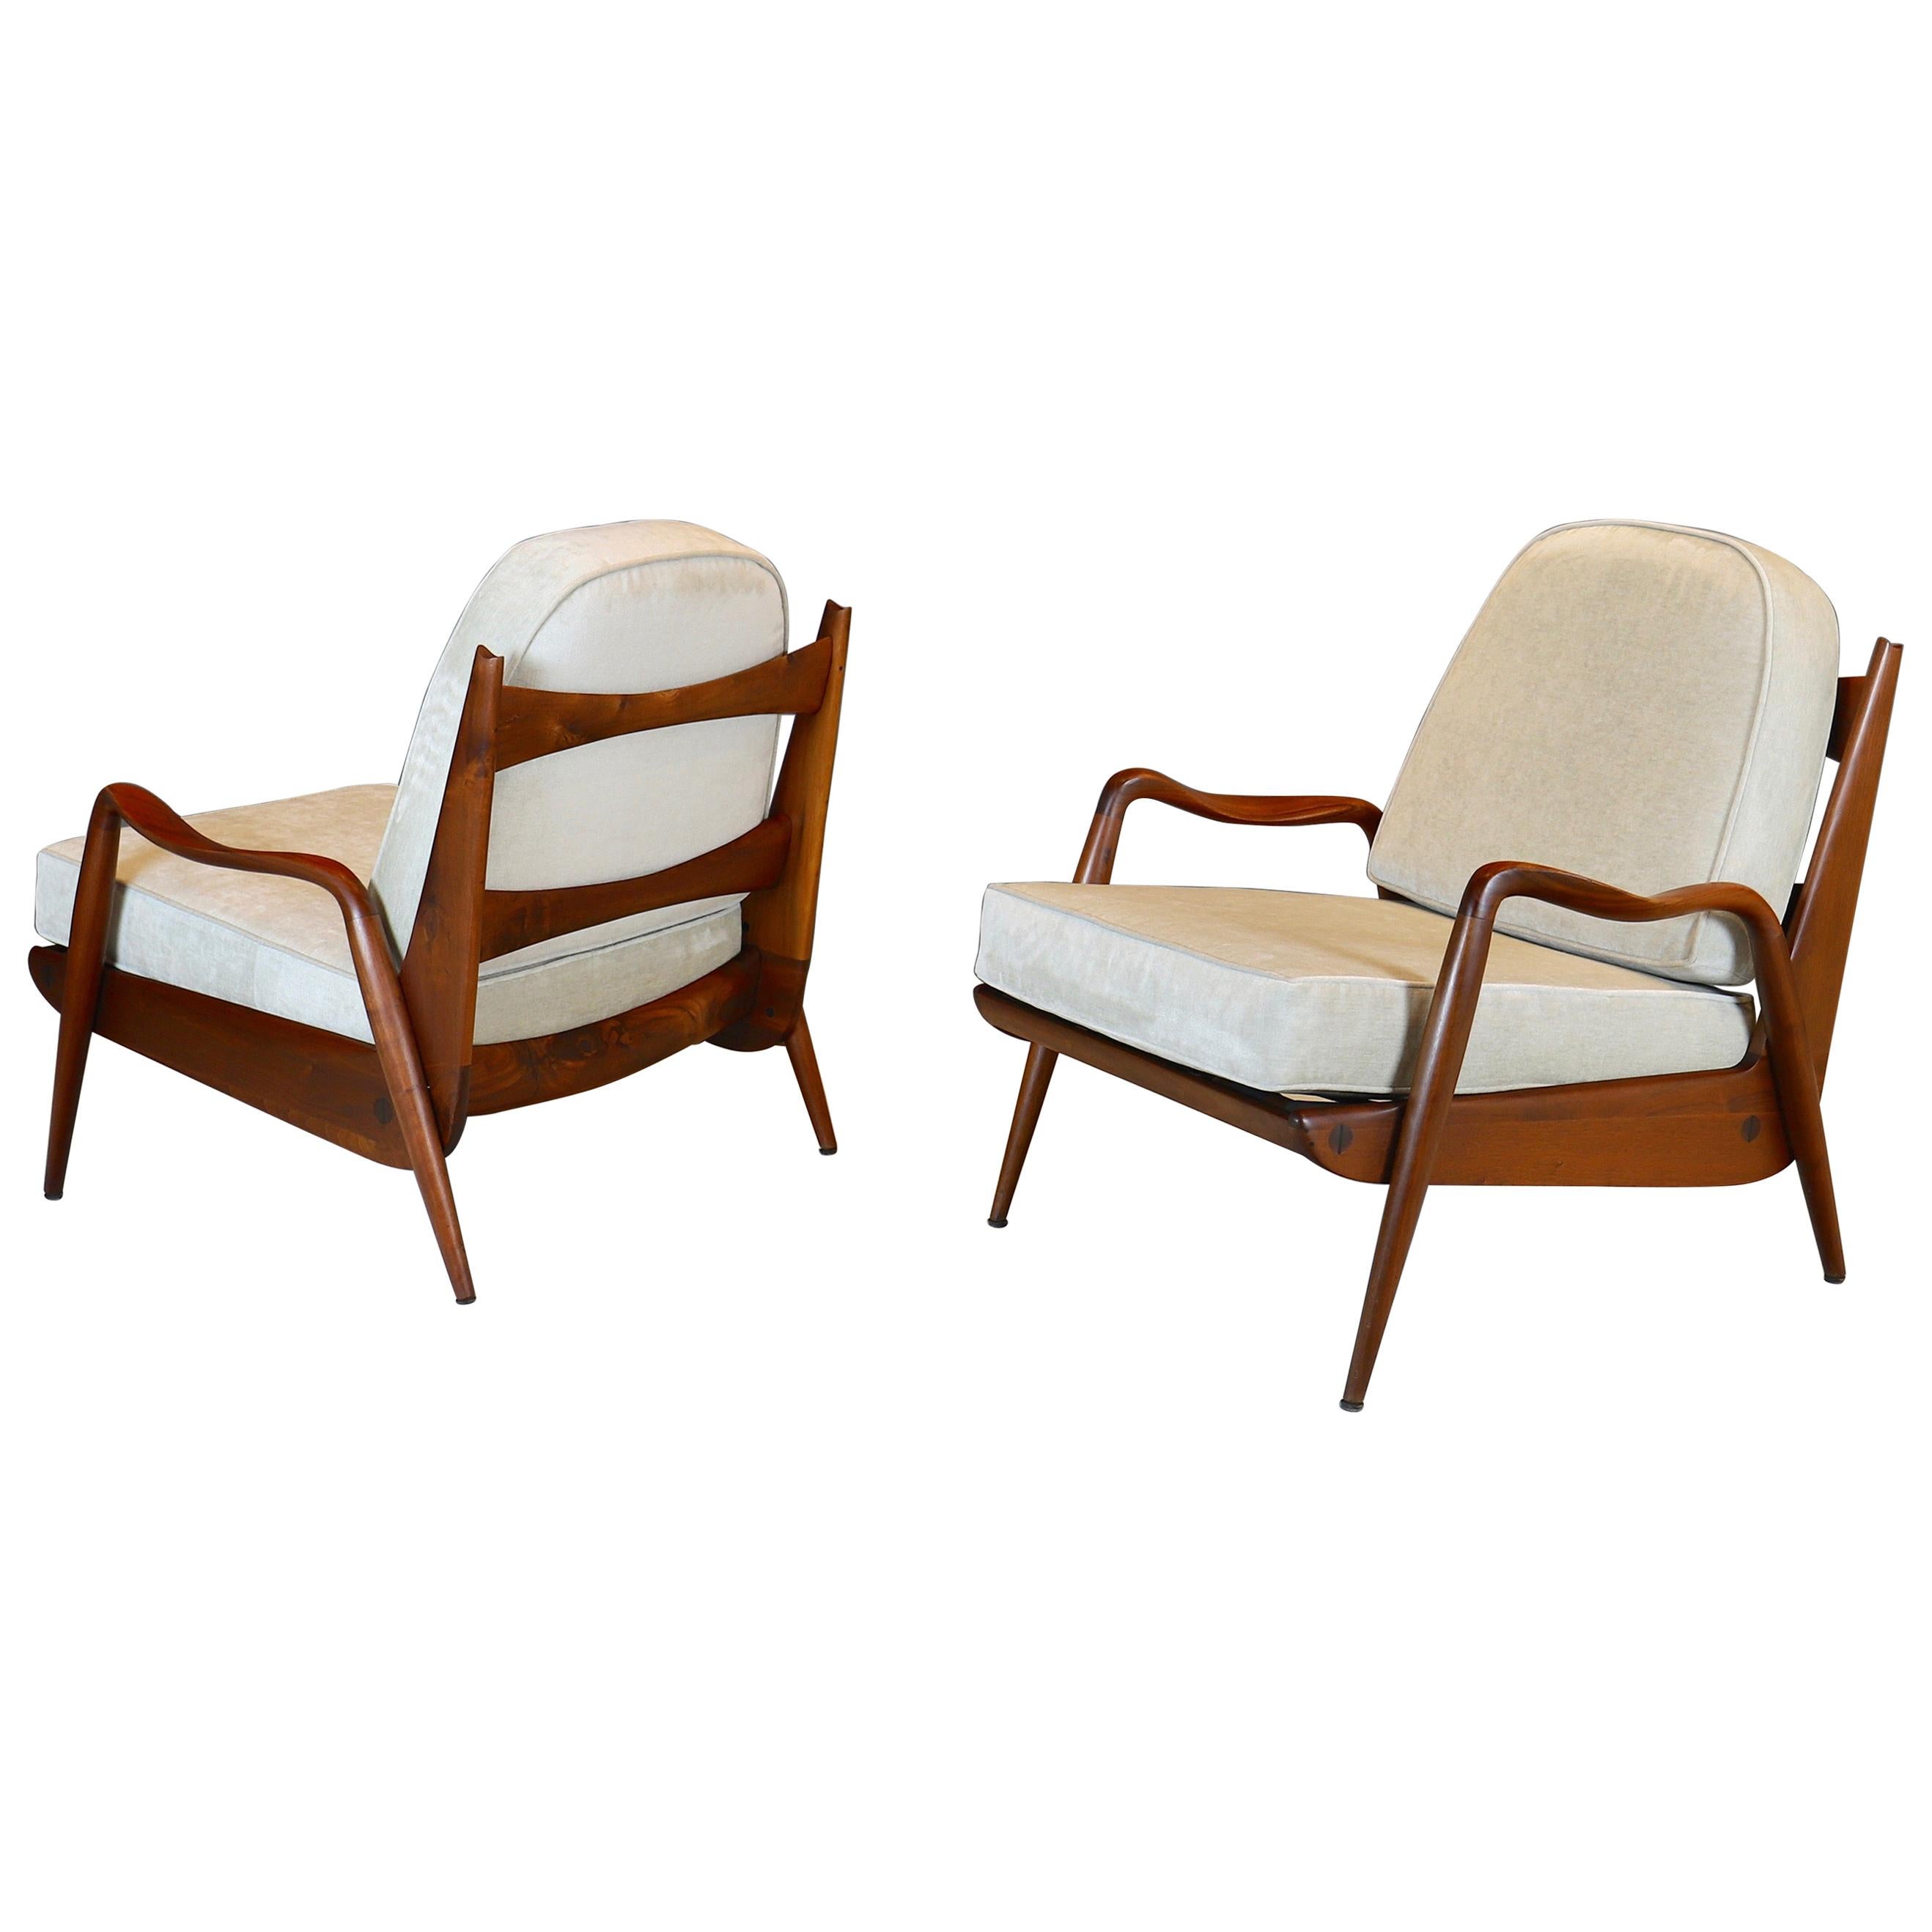 Pair of Phillip Lloyd Powell "New Hope" Lounge Chairs, 1970